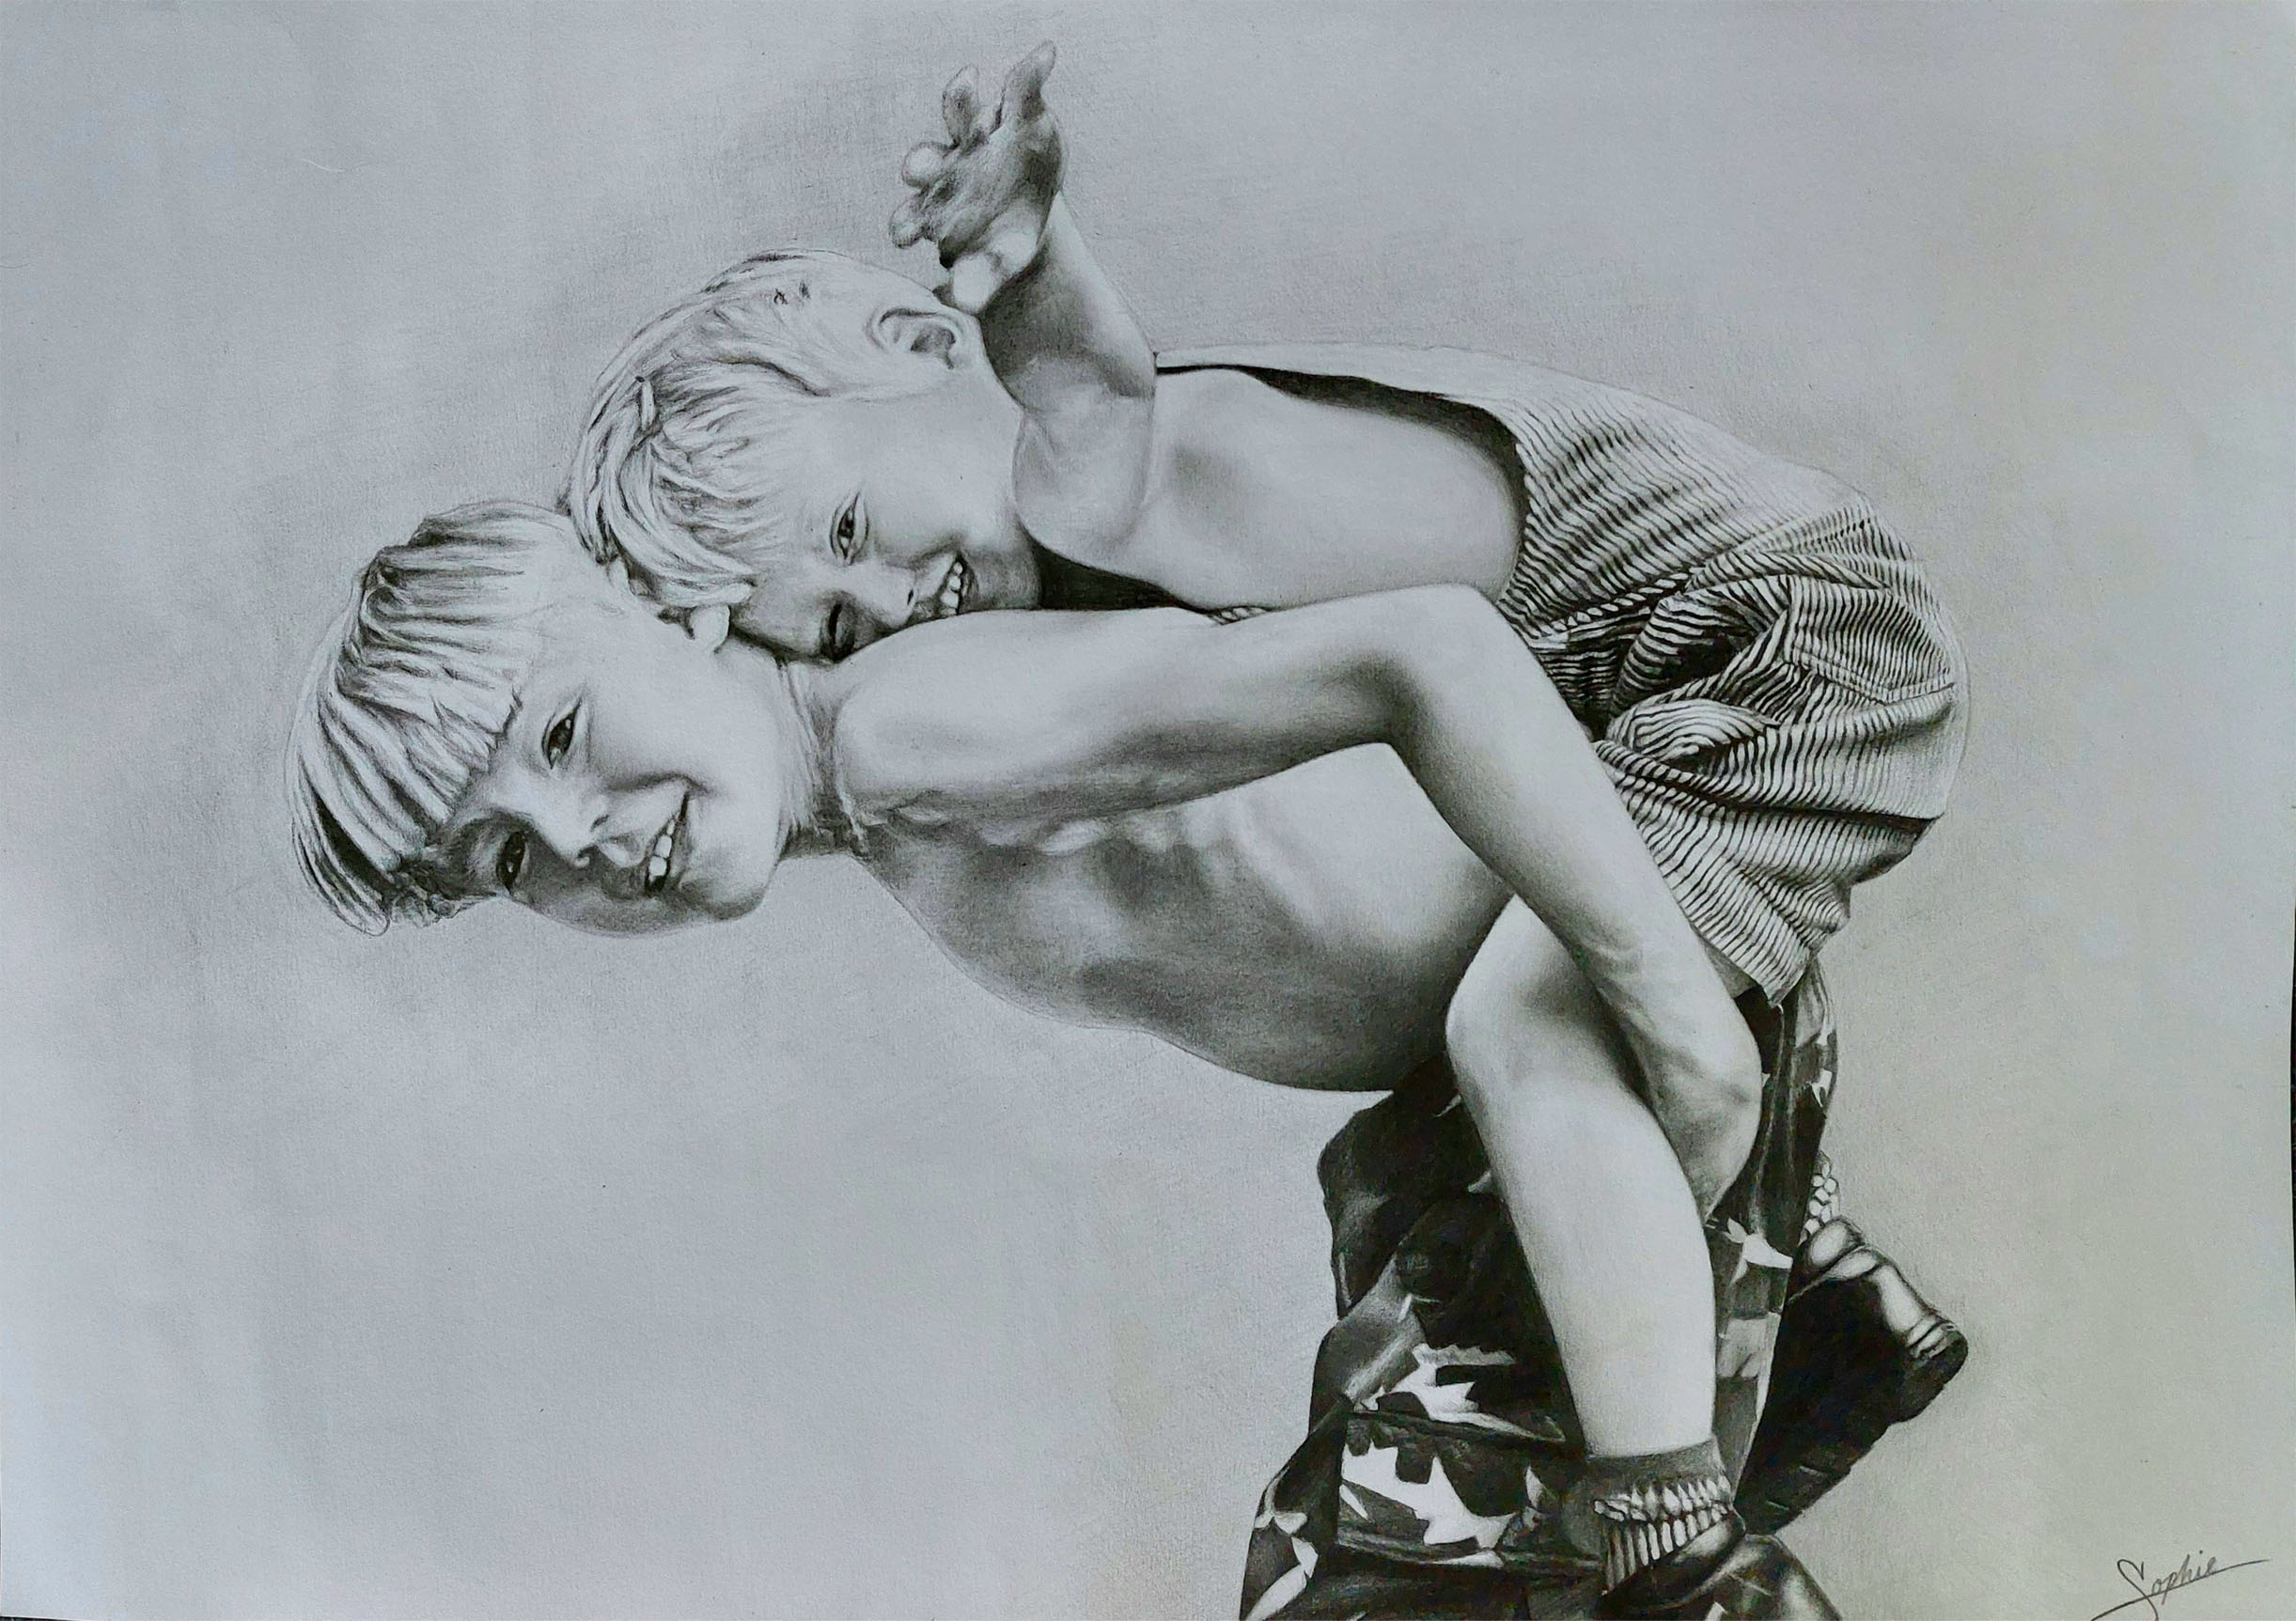 A pencil drawing showing 2 boys, one on the others back.